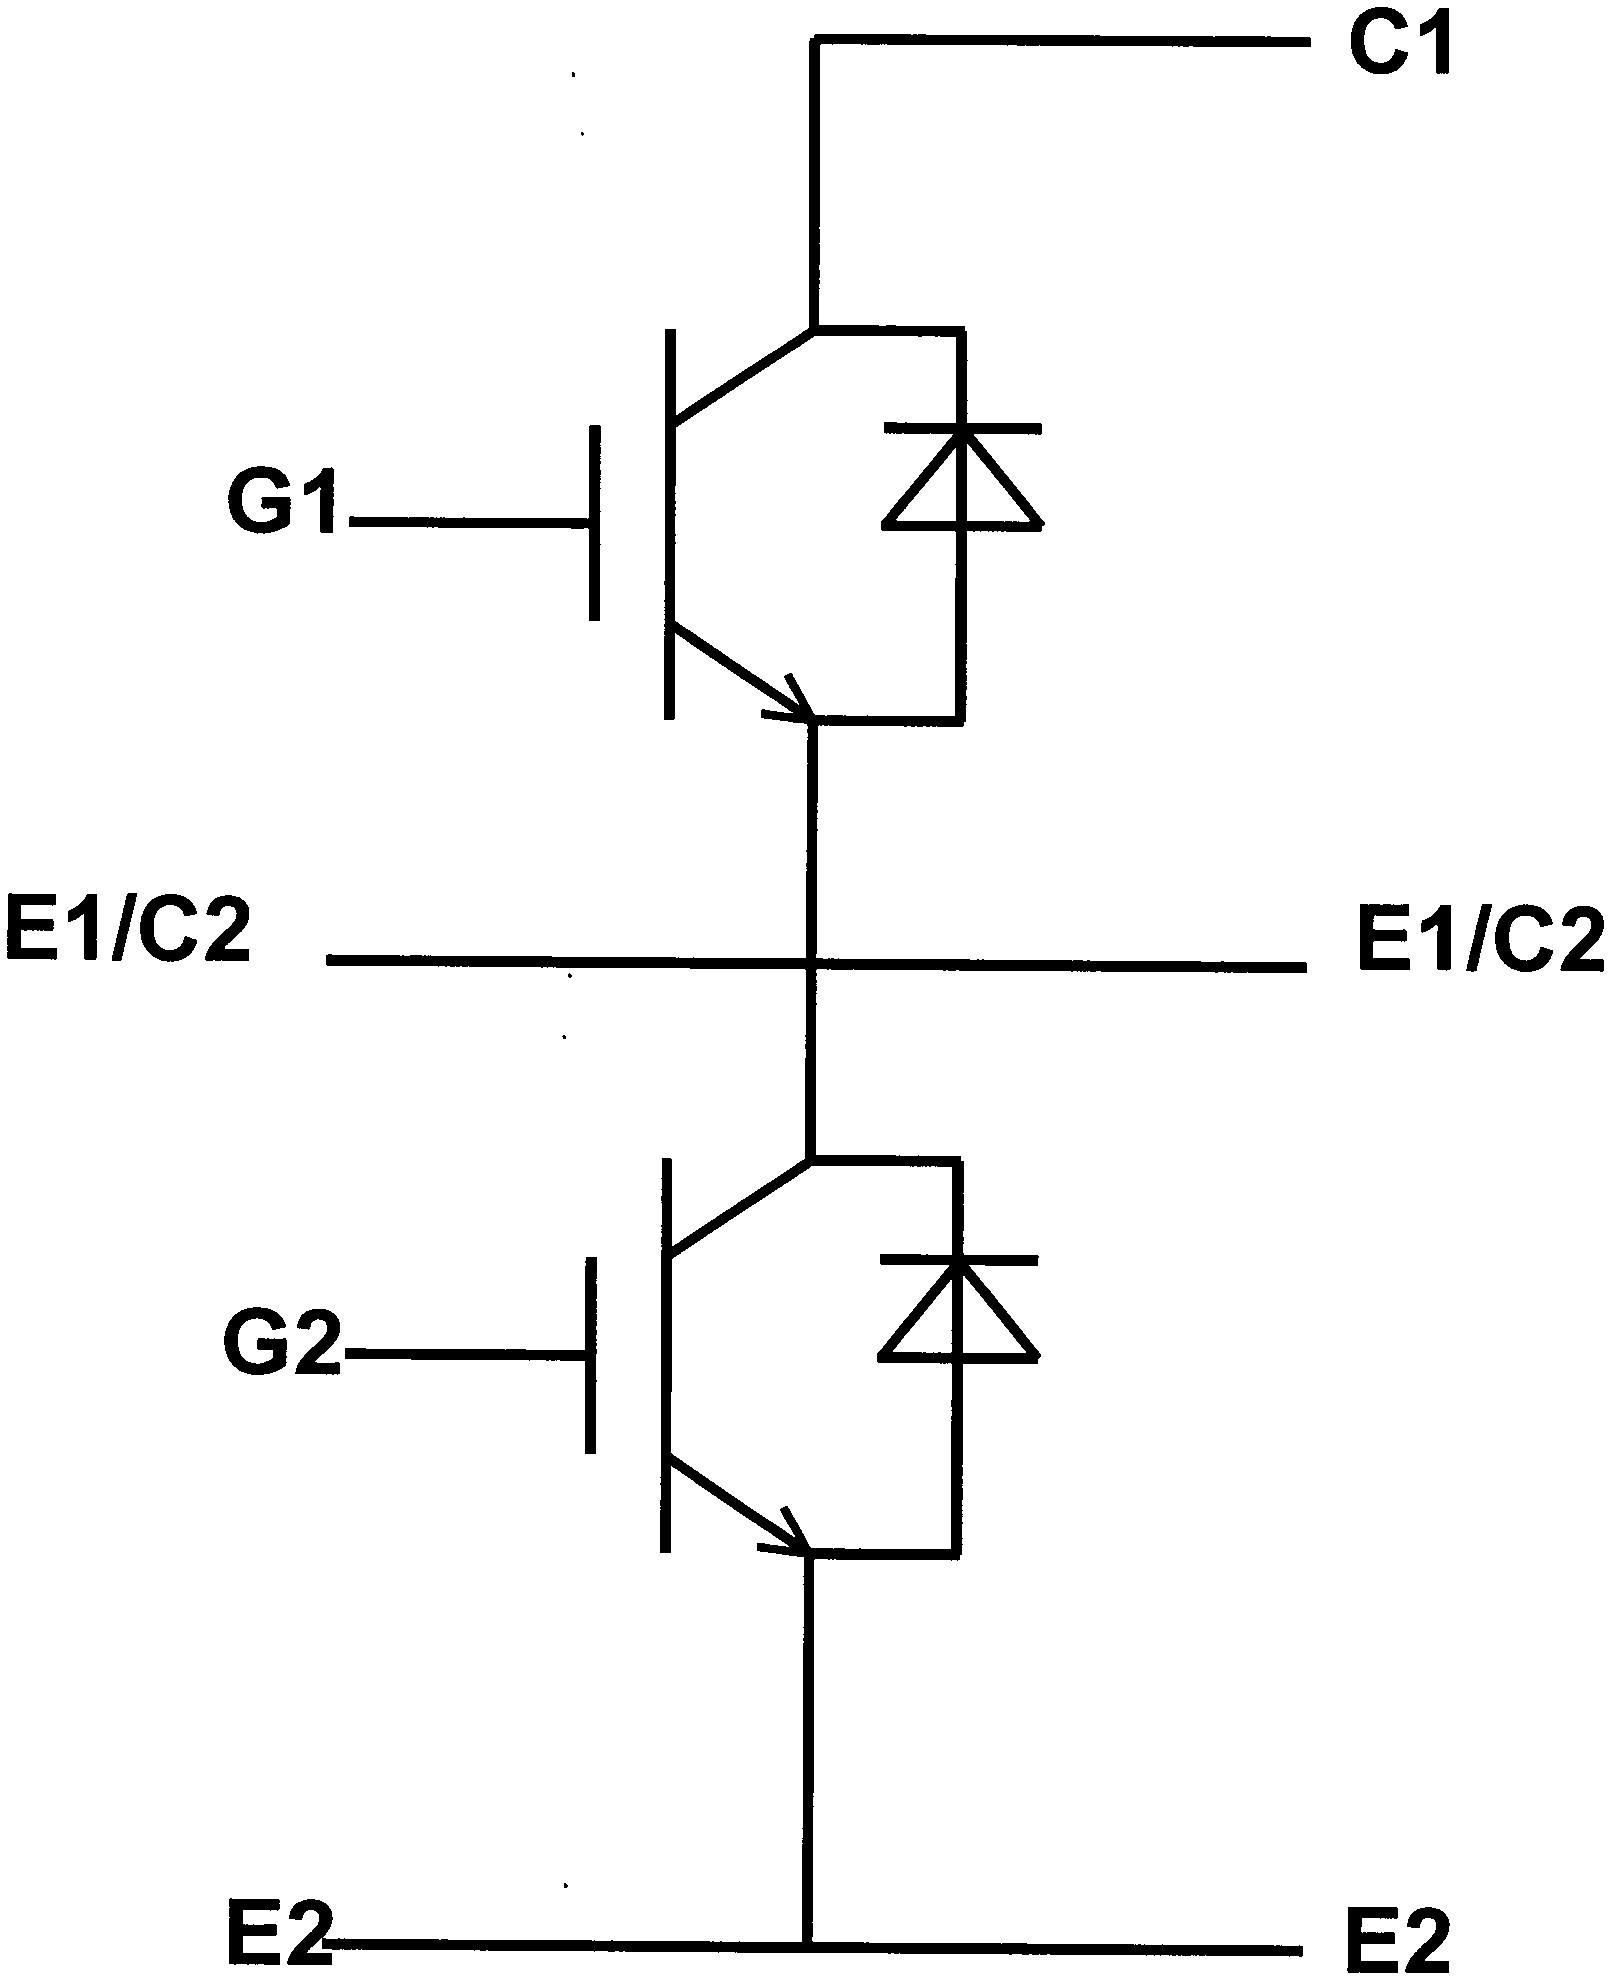 Optimally-designed test fixture for power module